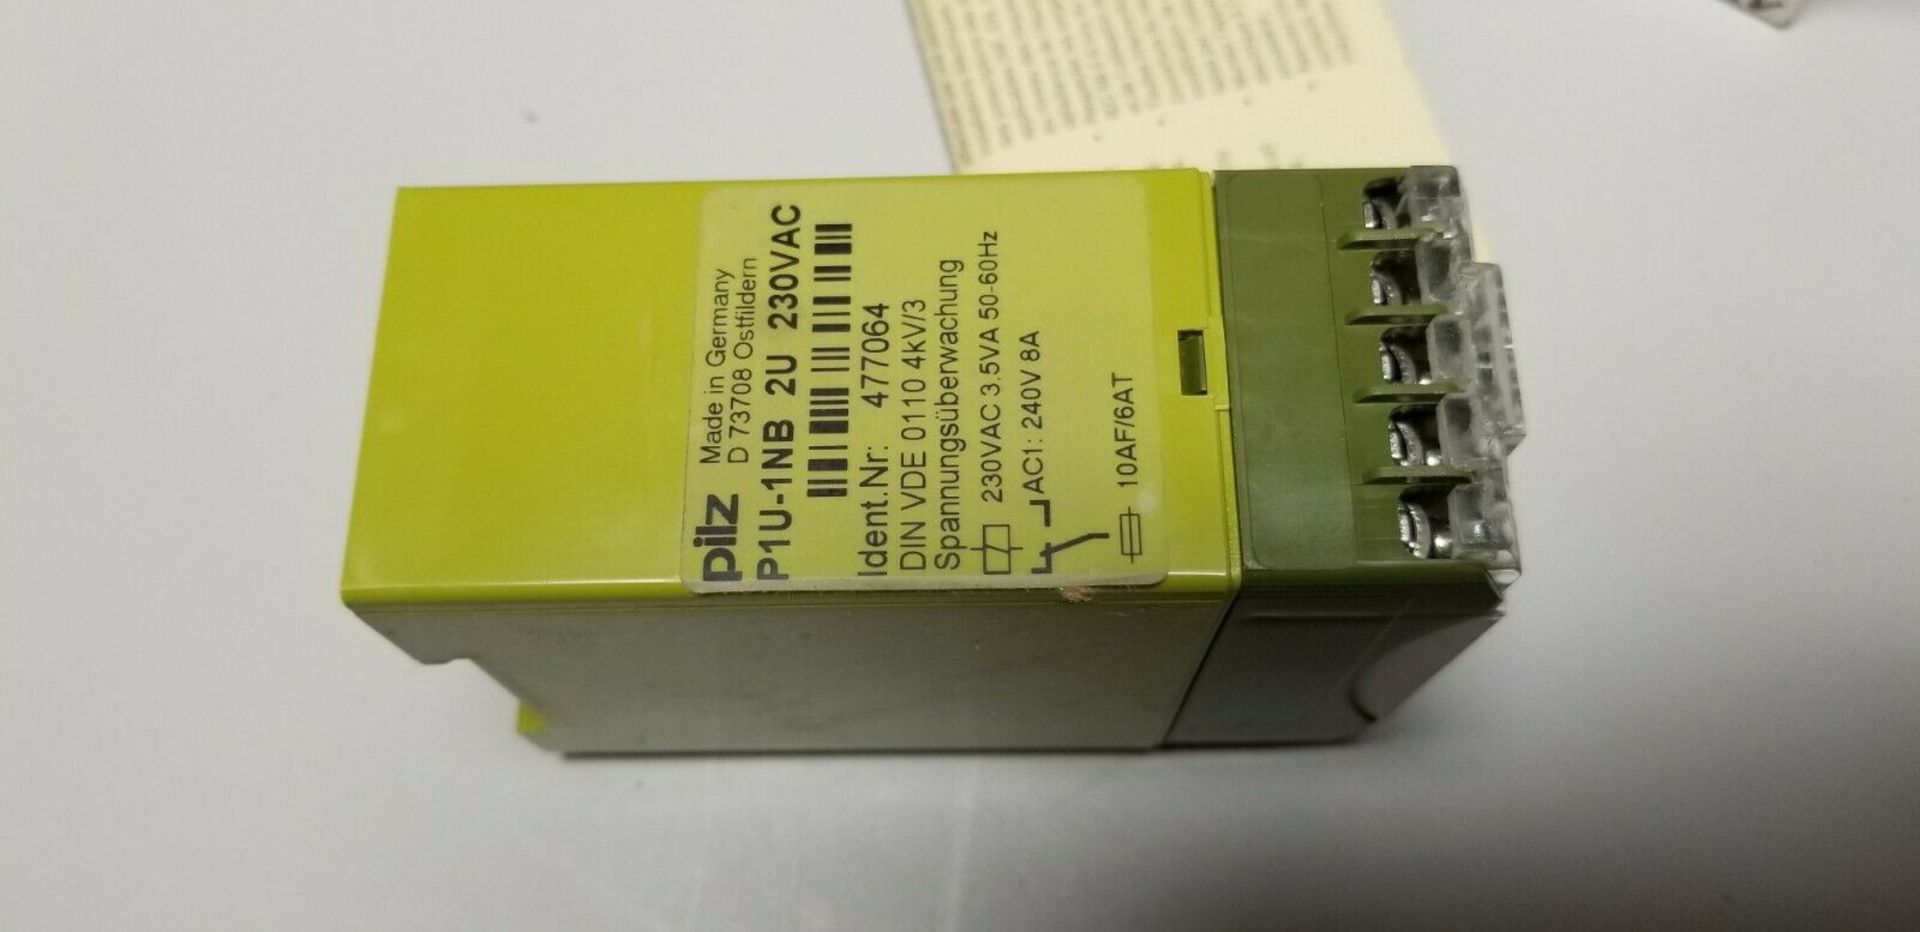 New Pilz Voltage Monitoring Safety Relay - Image 2 of 2